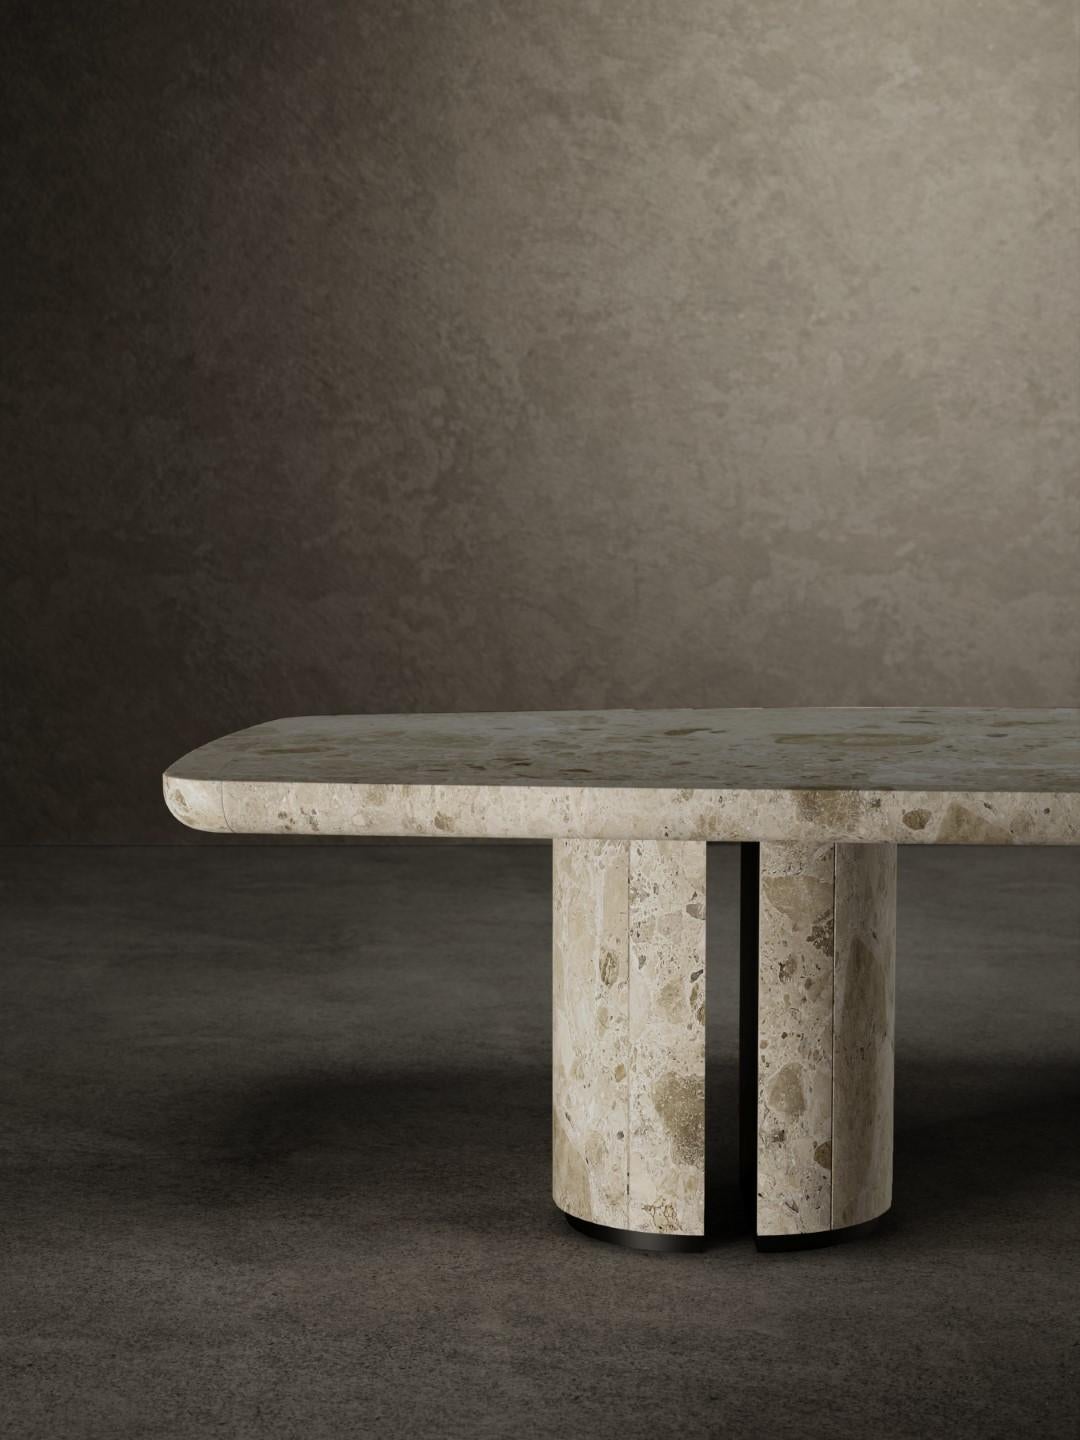 For No One dining table has a top made up of a supported Ambrosia matt marble slab with an 8 cm frame in solid marble.
The top is anchored to the two bases by matt black metal plates. Each base is made up of two half-cylinders in matt-finishing